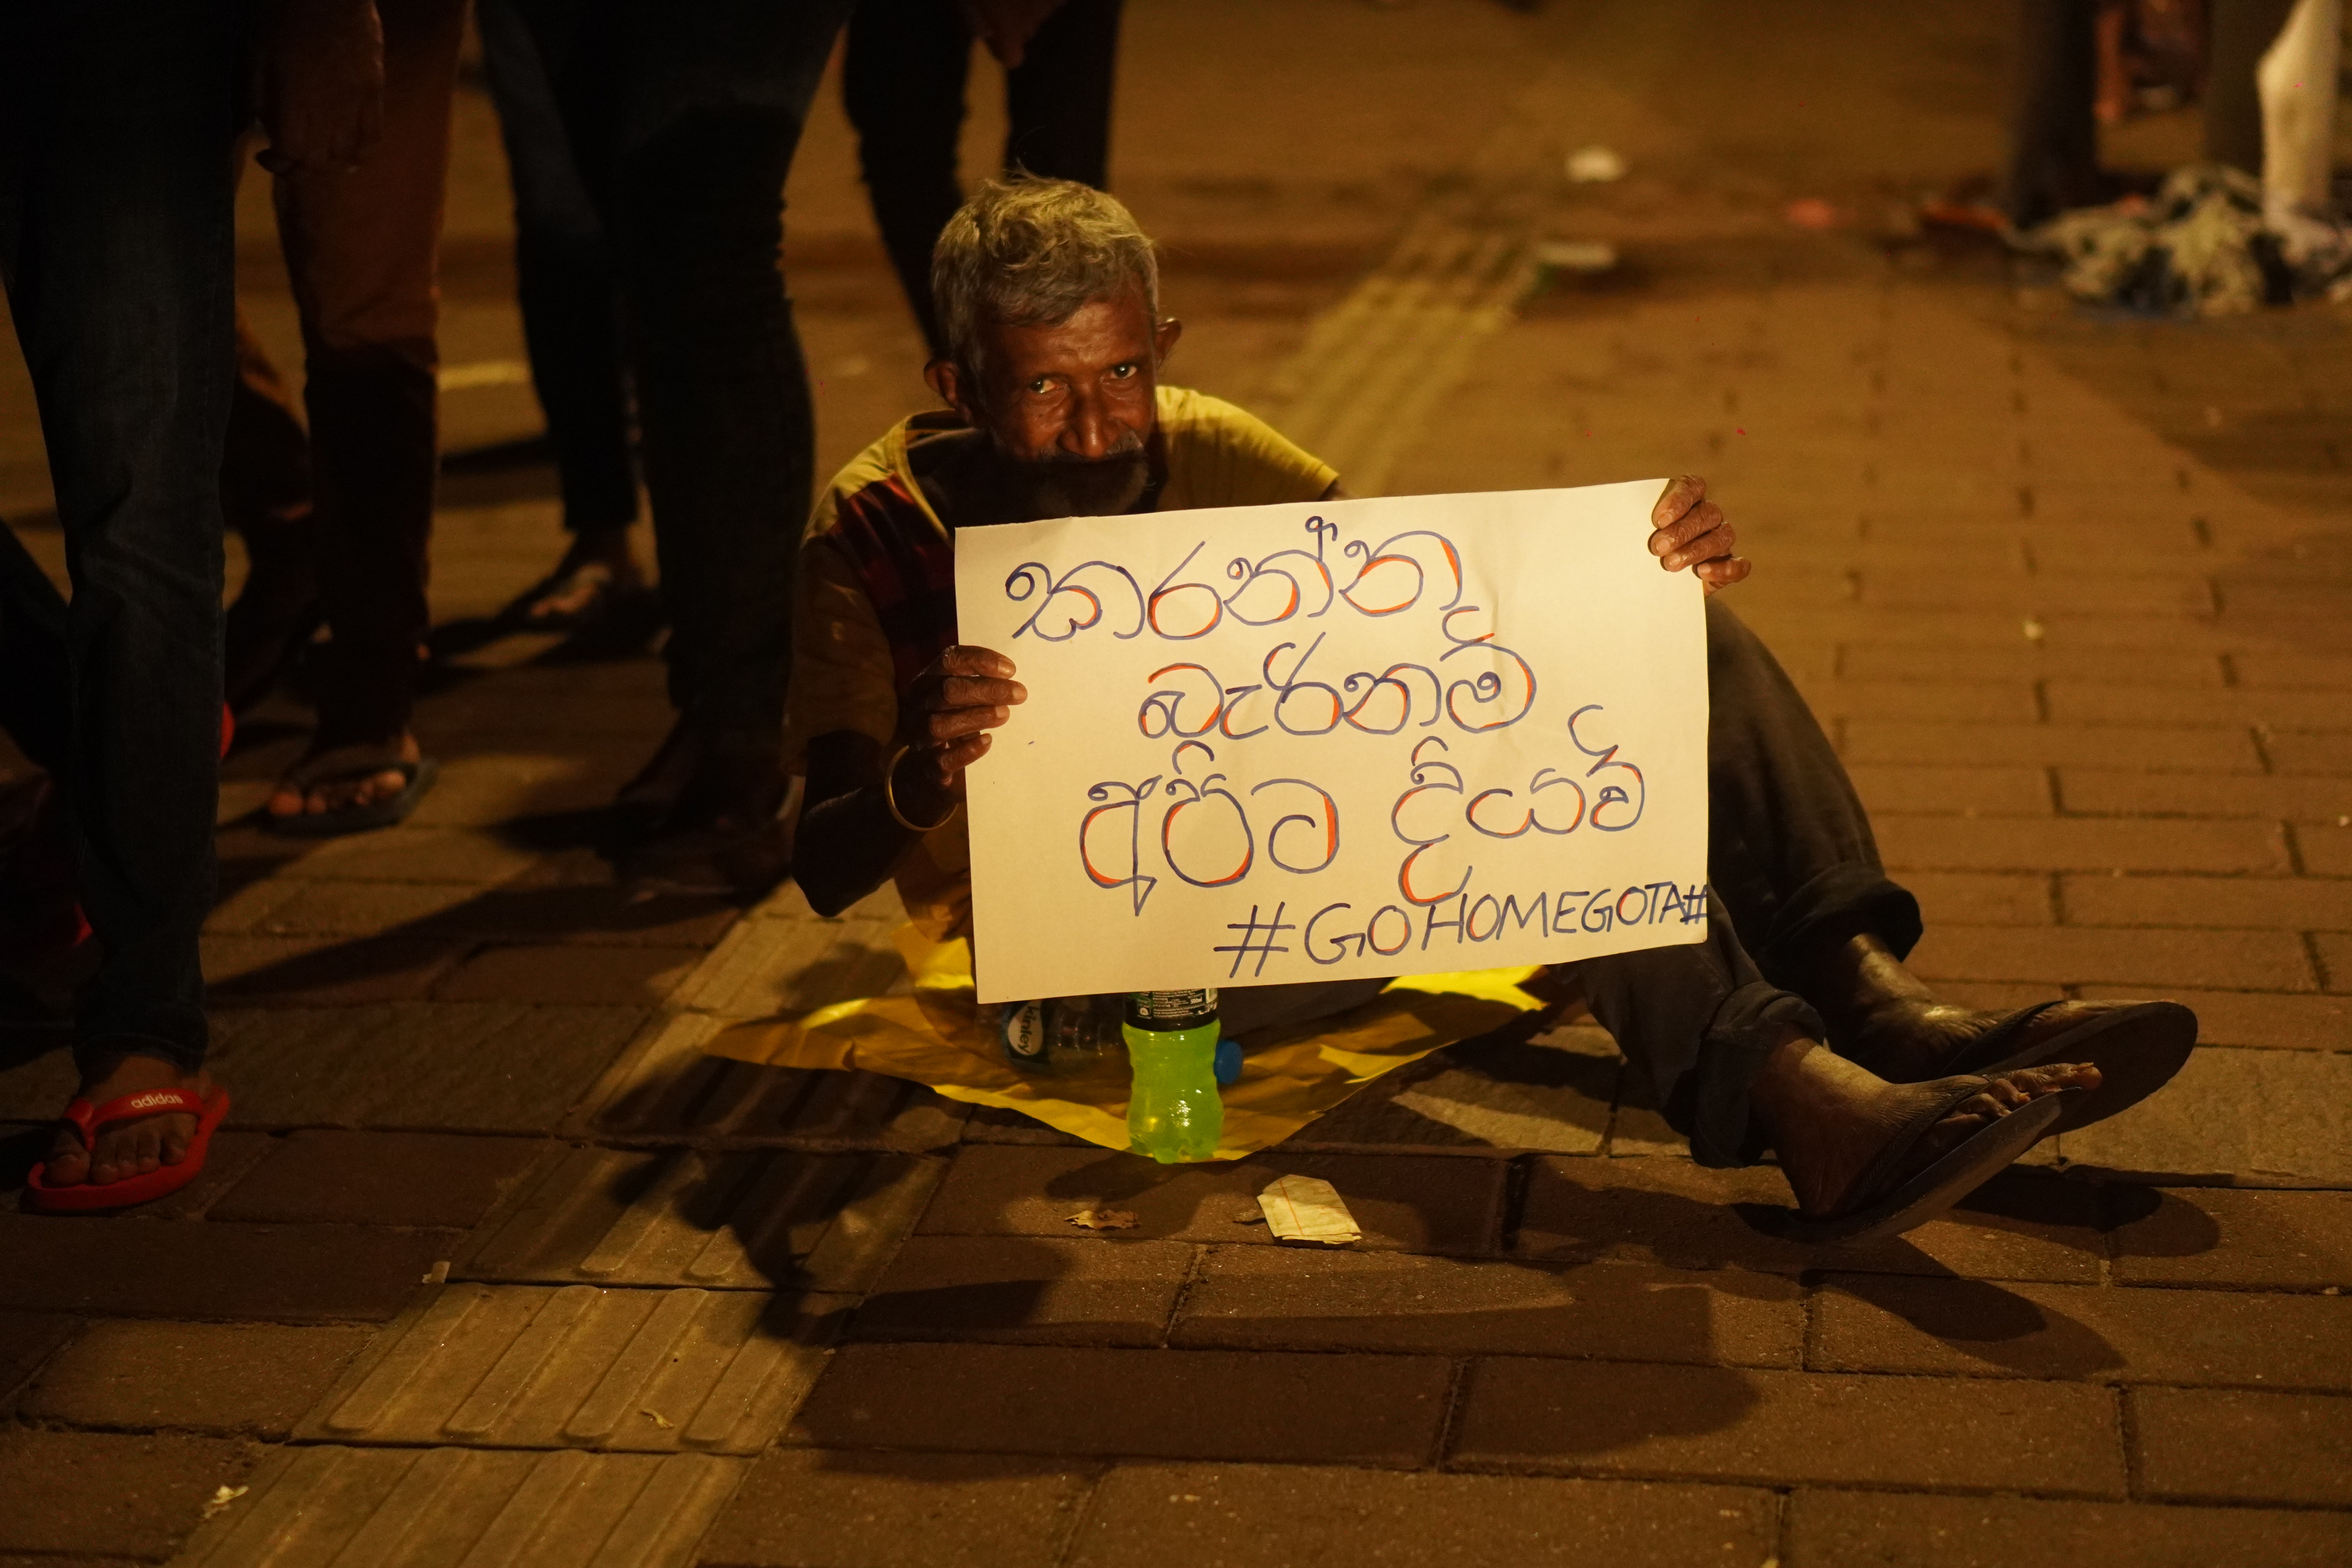 An elderly man seated on the ground holds a sign that says “If you can’t, then give it to us #GoHomeGota,” at a protest against the Rajapaksa administration in Galle Face, 20 April 2022. Photo by Riyal Riffai.